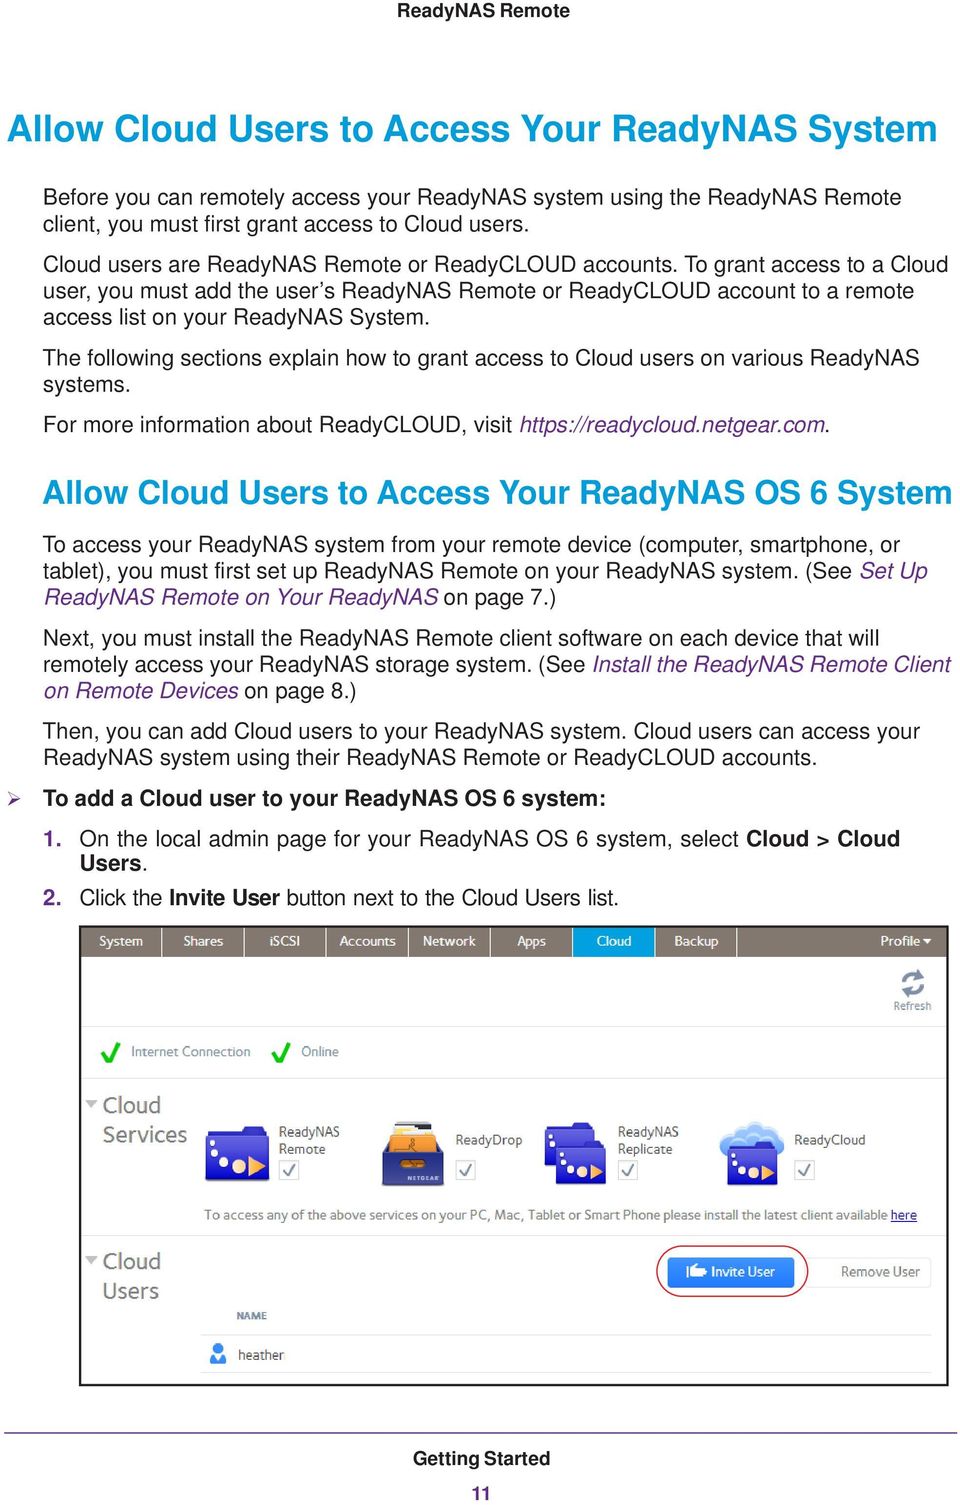 The following sections explain how to grant access to Cloud users on various ReadyNAS systems. For more information about ReadyCLOUD, visit https://readycloud.netgear.com.